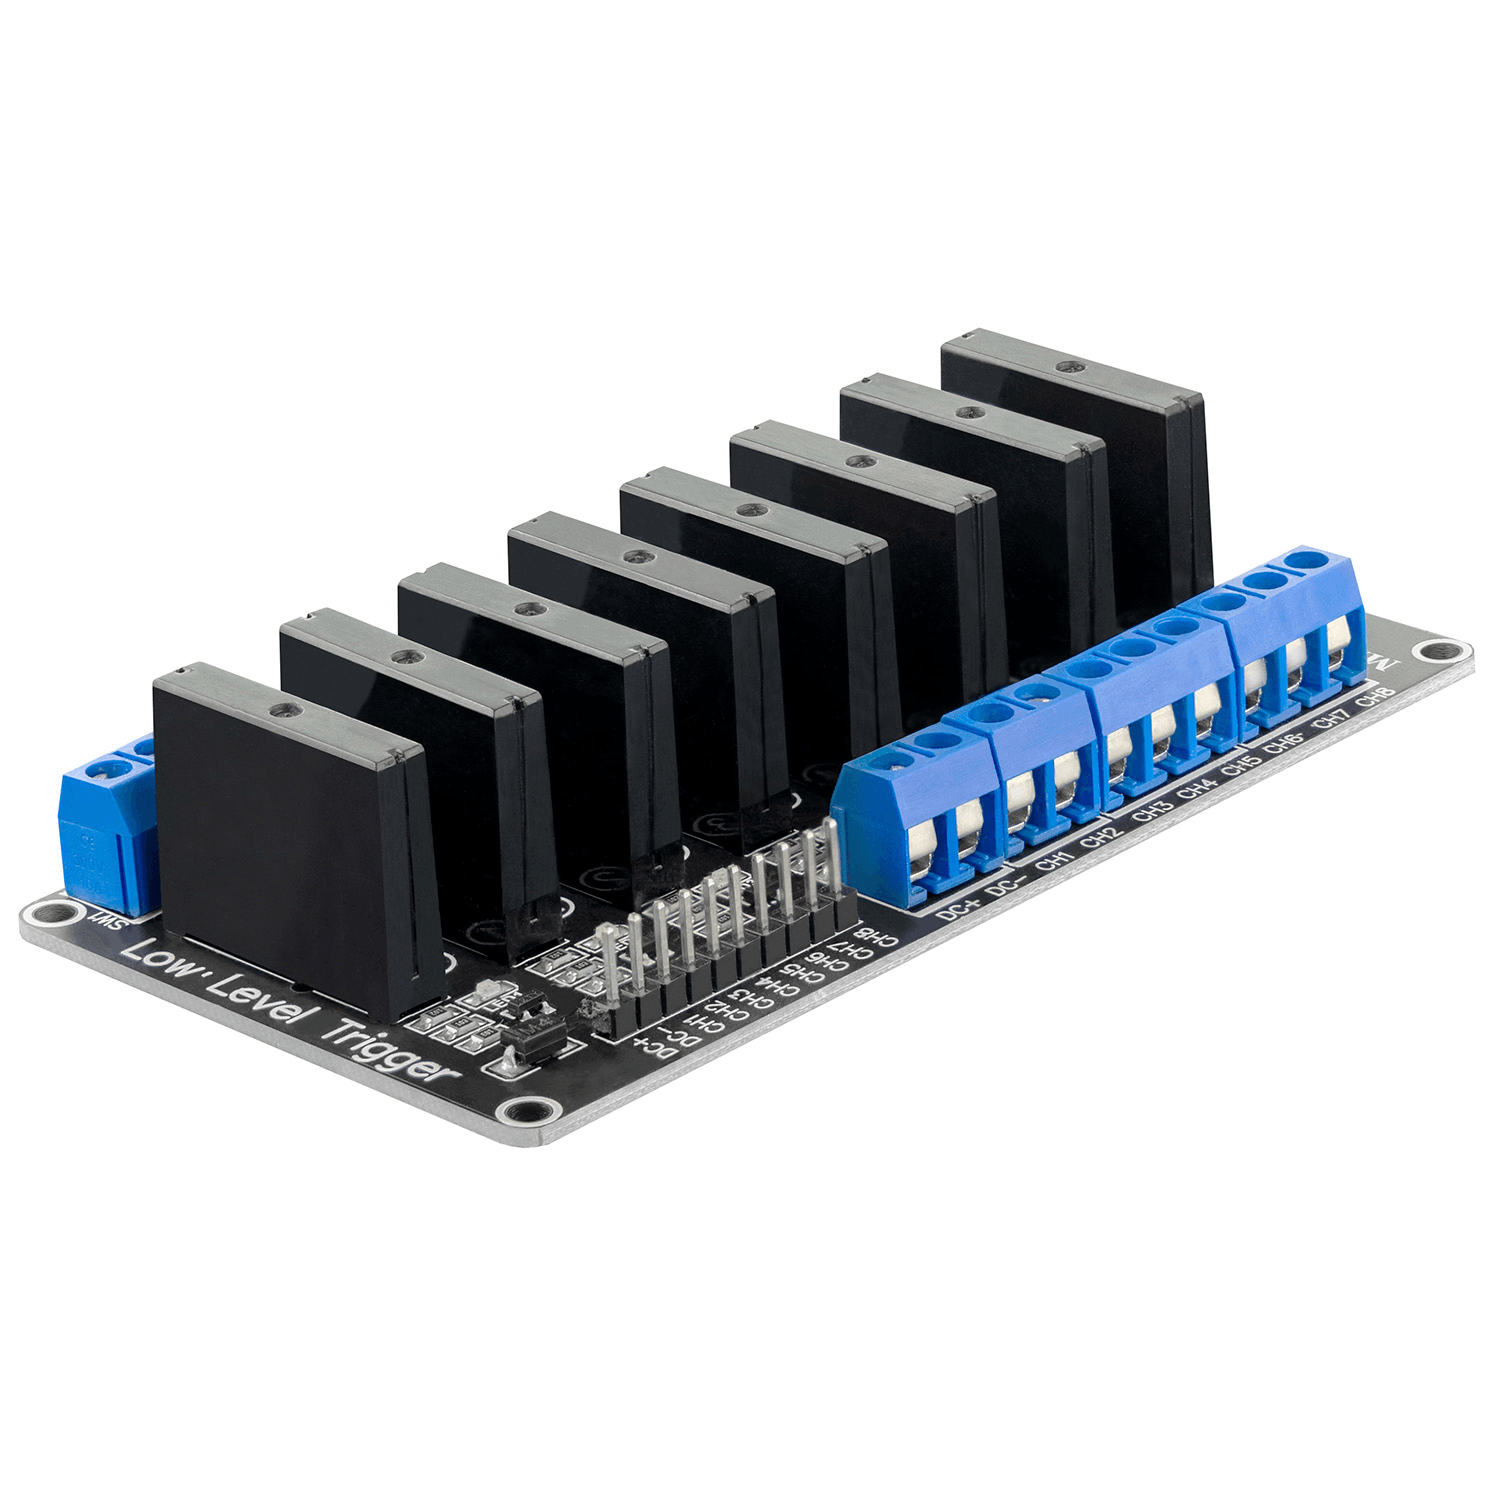 8 Channel Solid State Relay 5V DC Low Level Trigger Power Switch Compatible with Arduino and Raspberry Pi